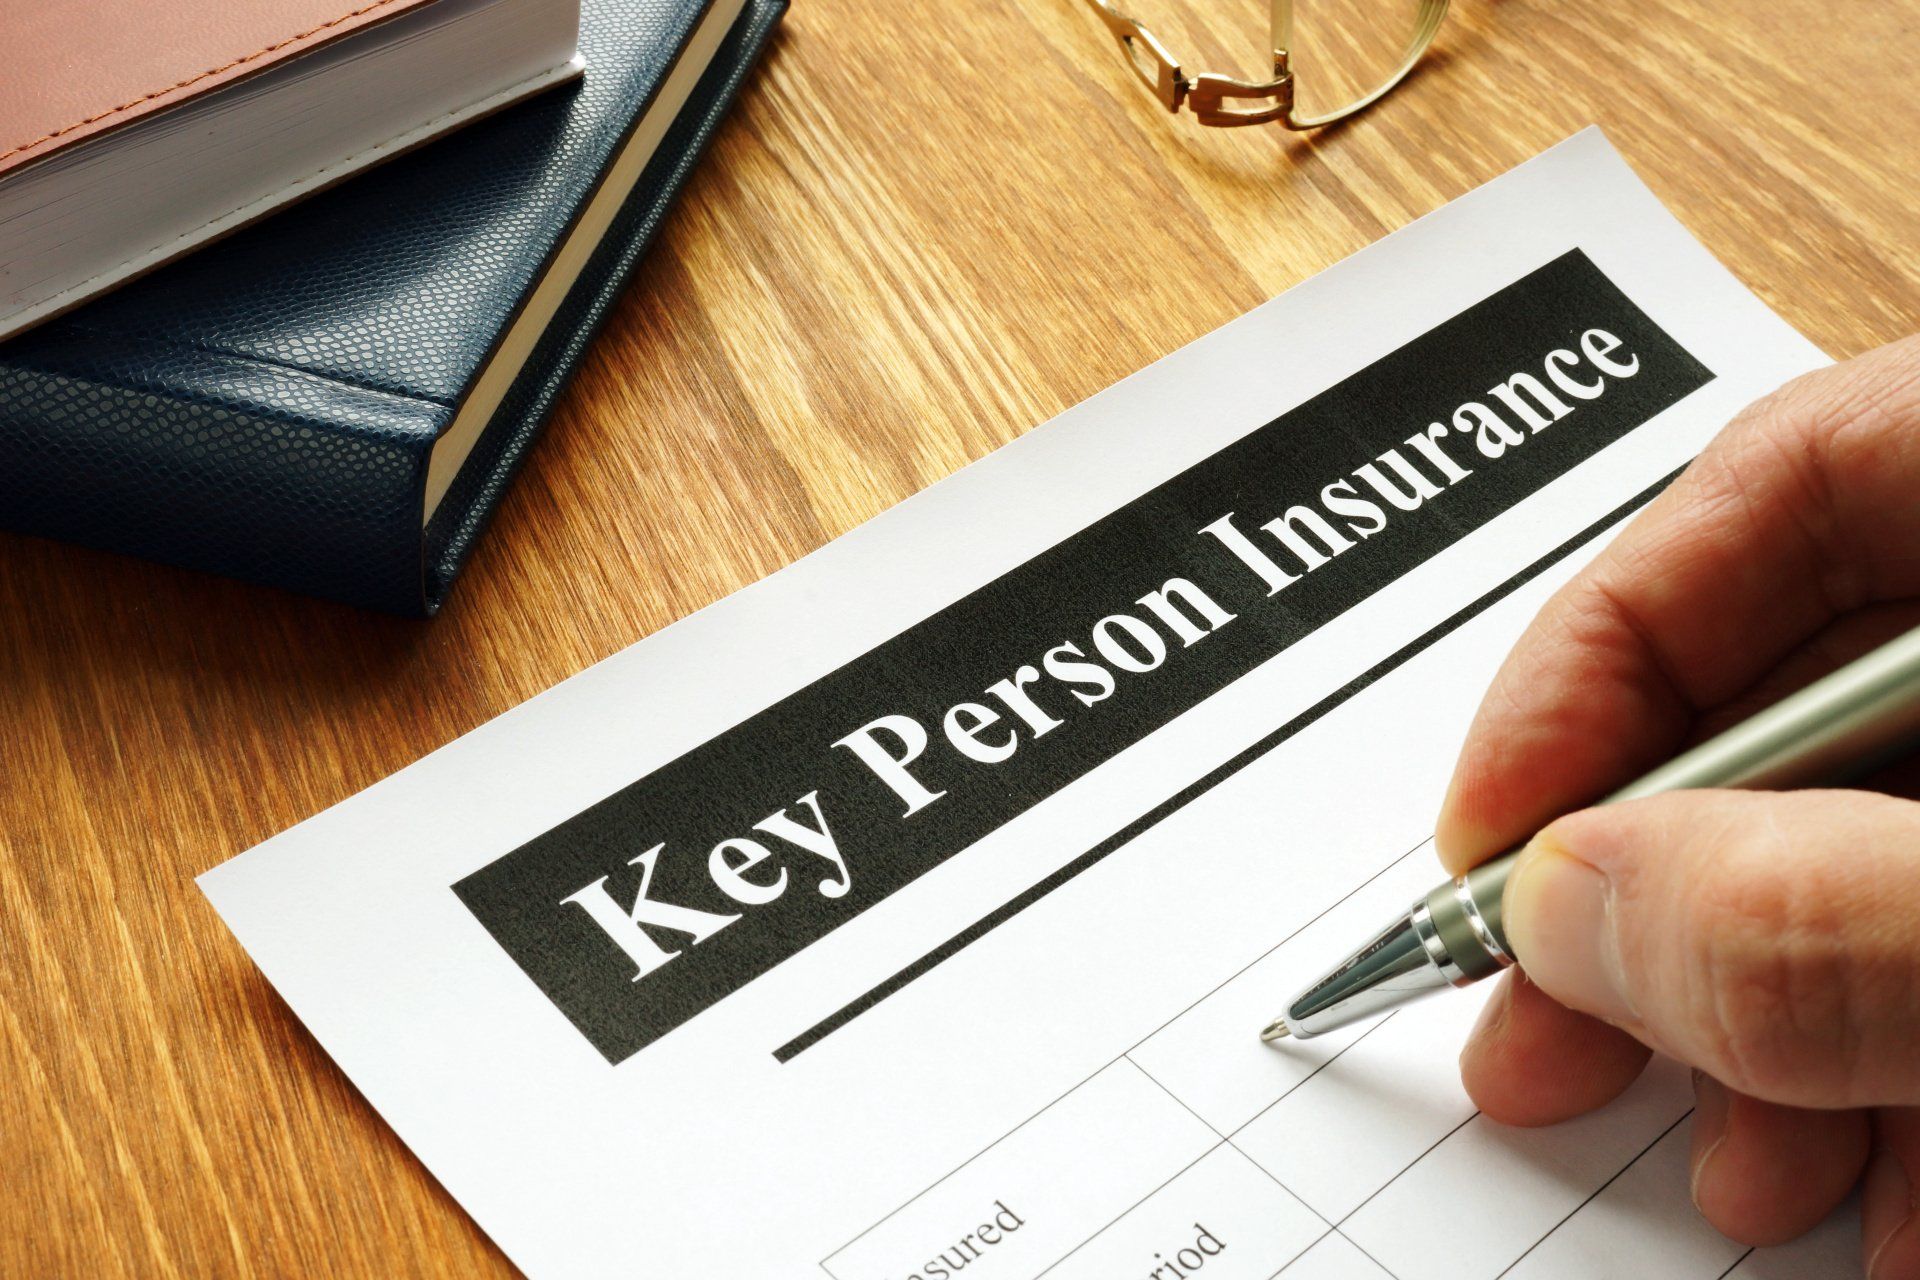 key person business insurance, key person insurance for small business